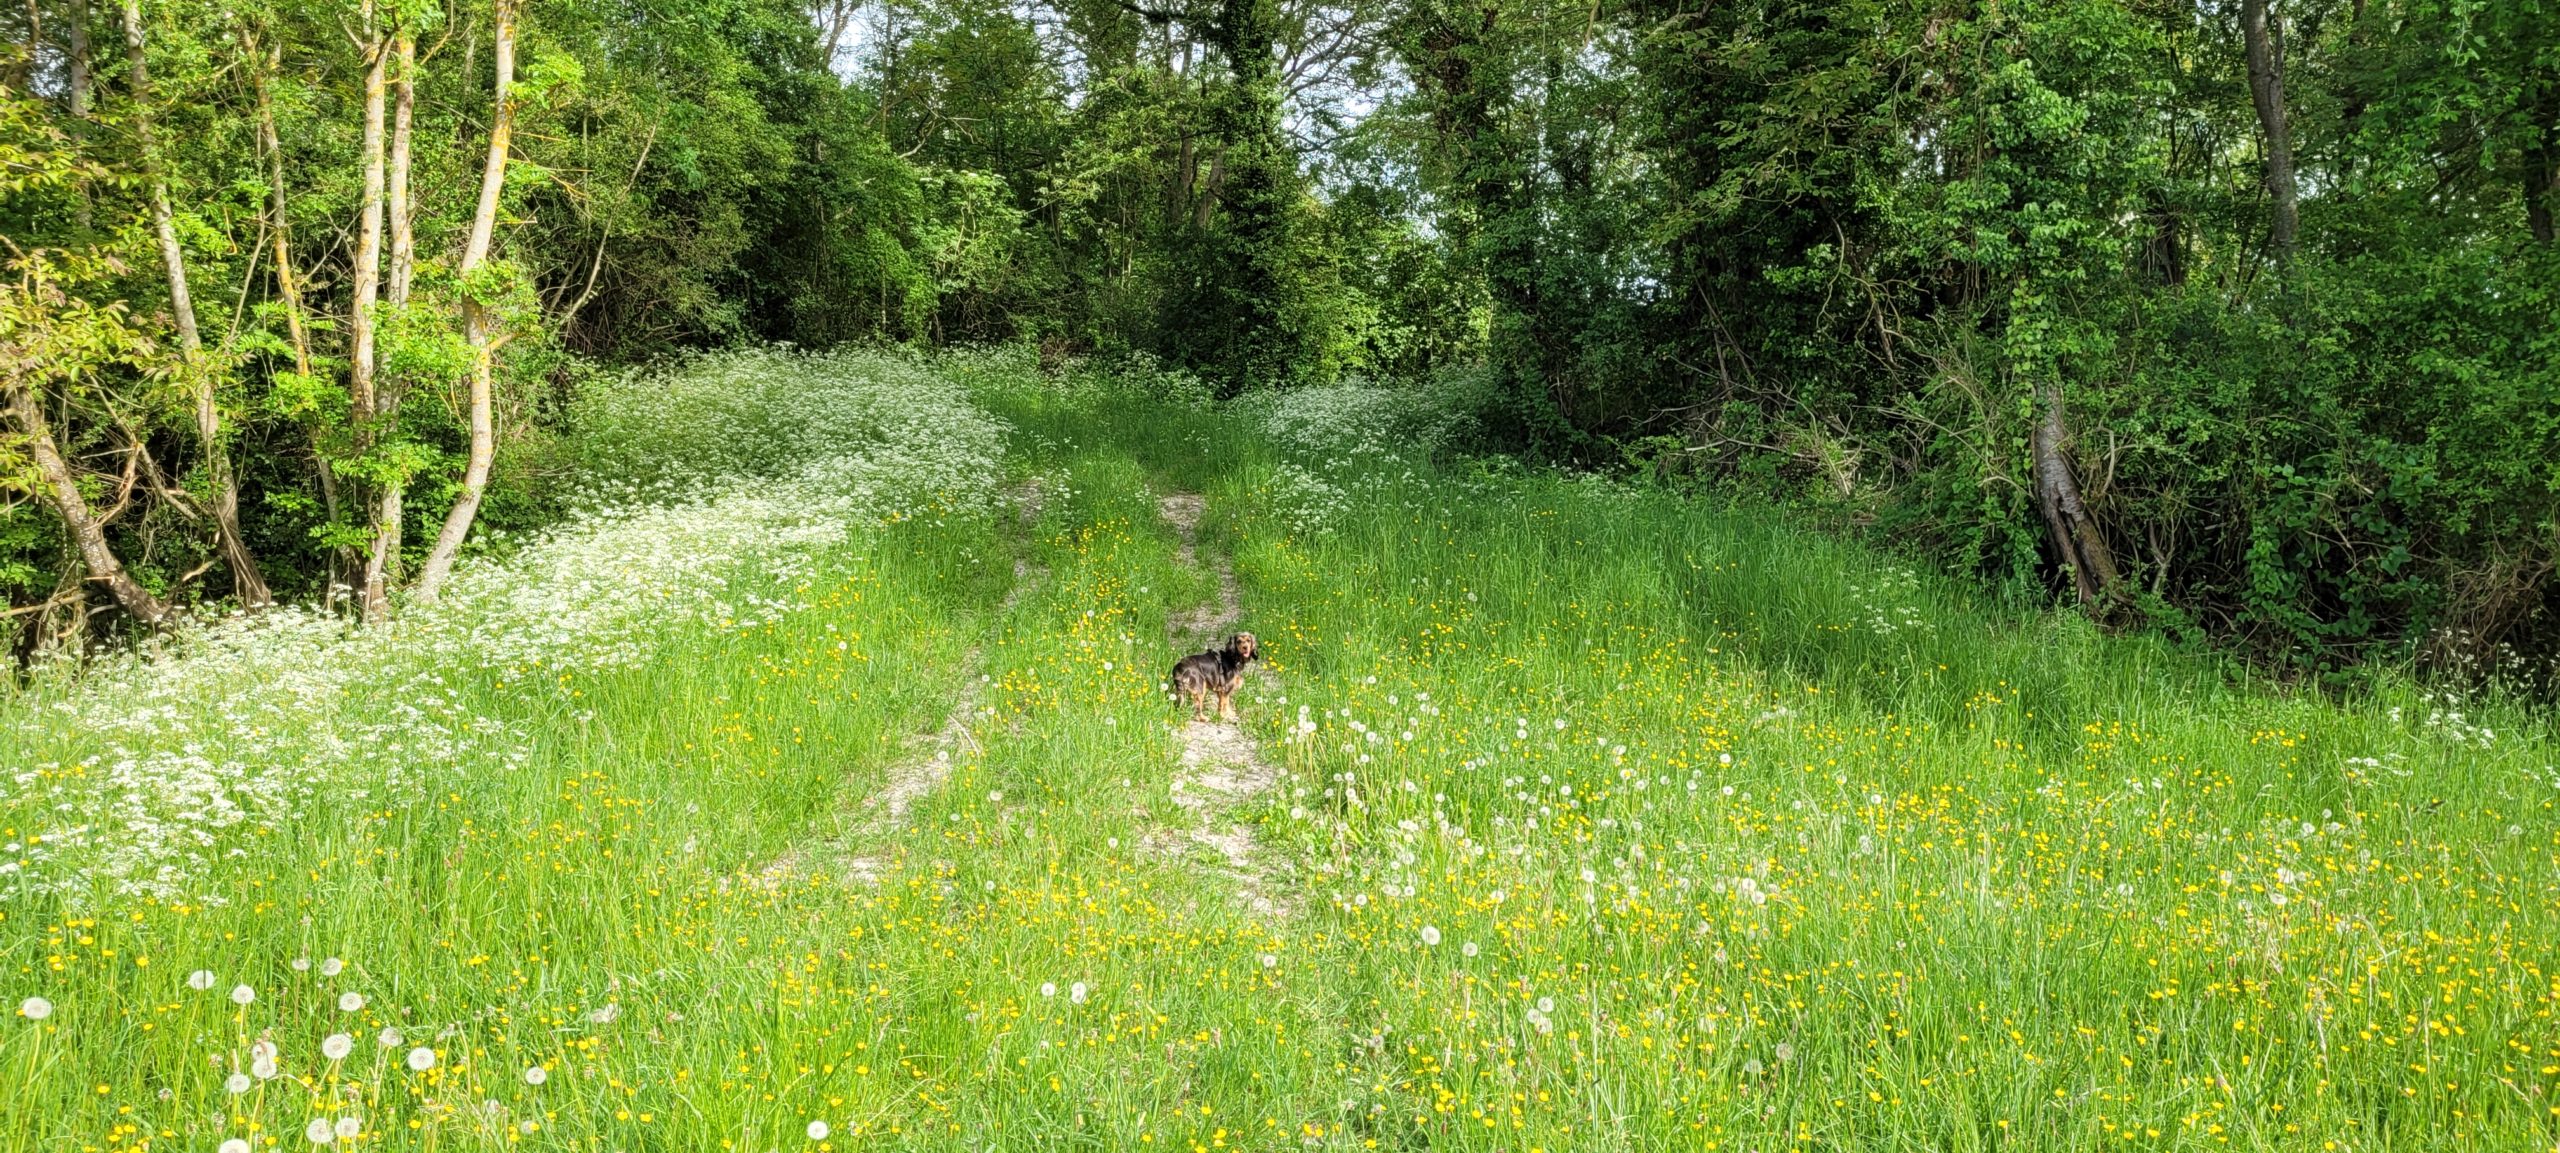 a dog in a field of grass and flowers on a hill